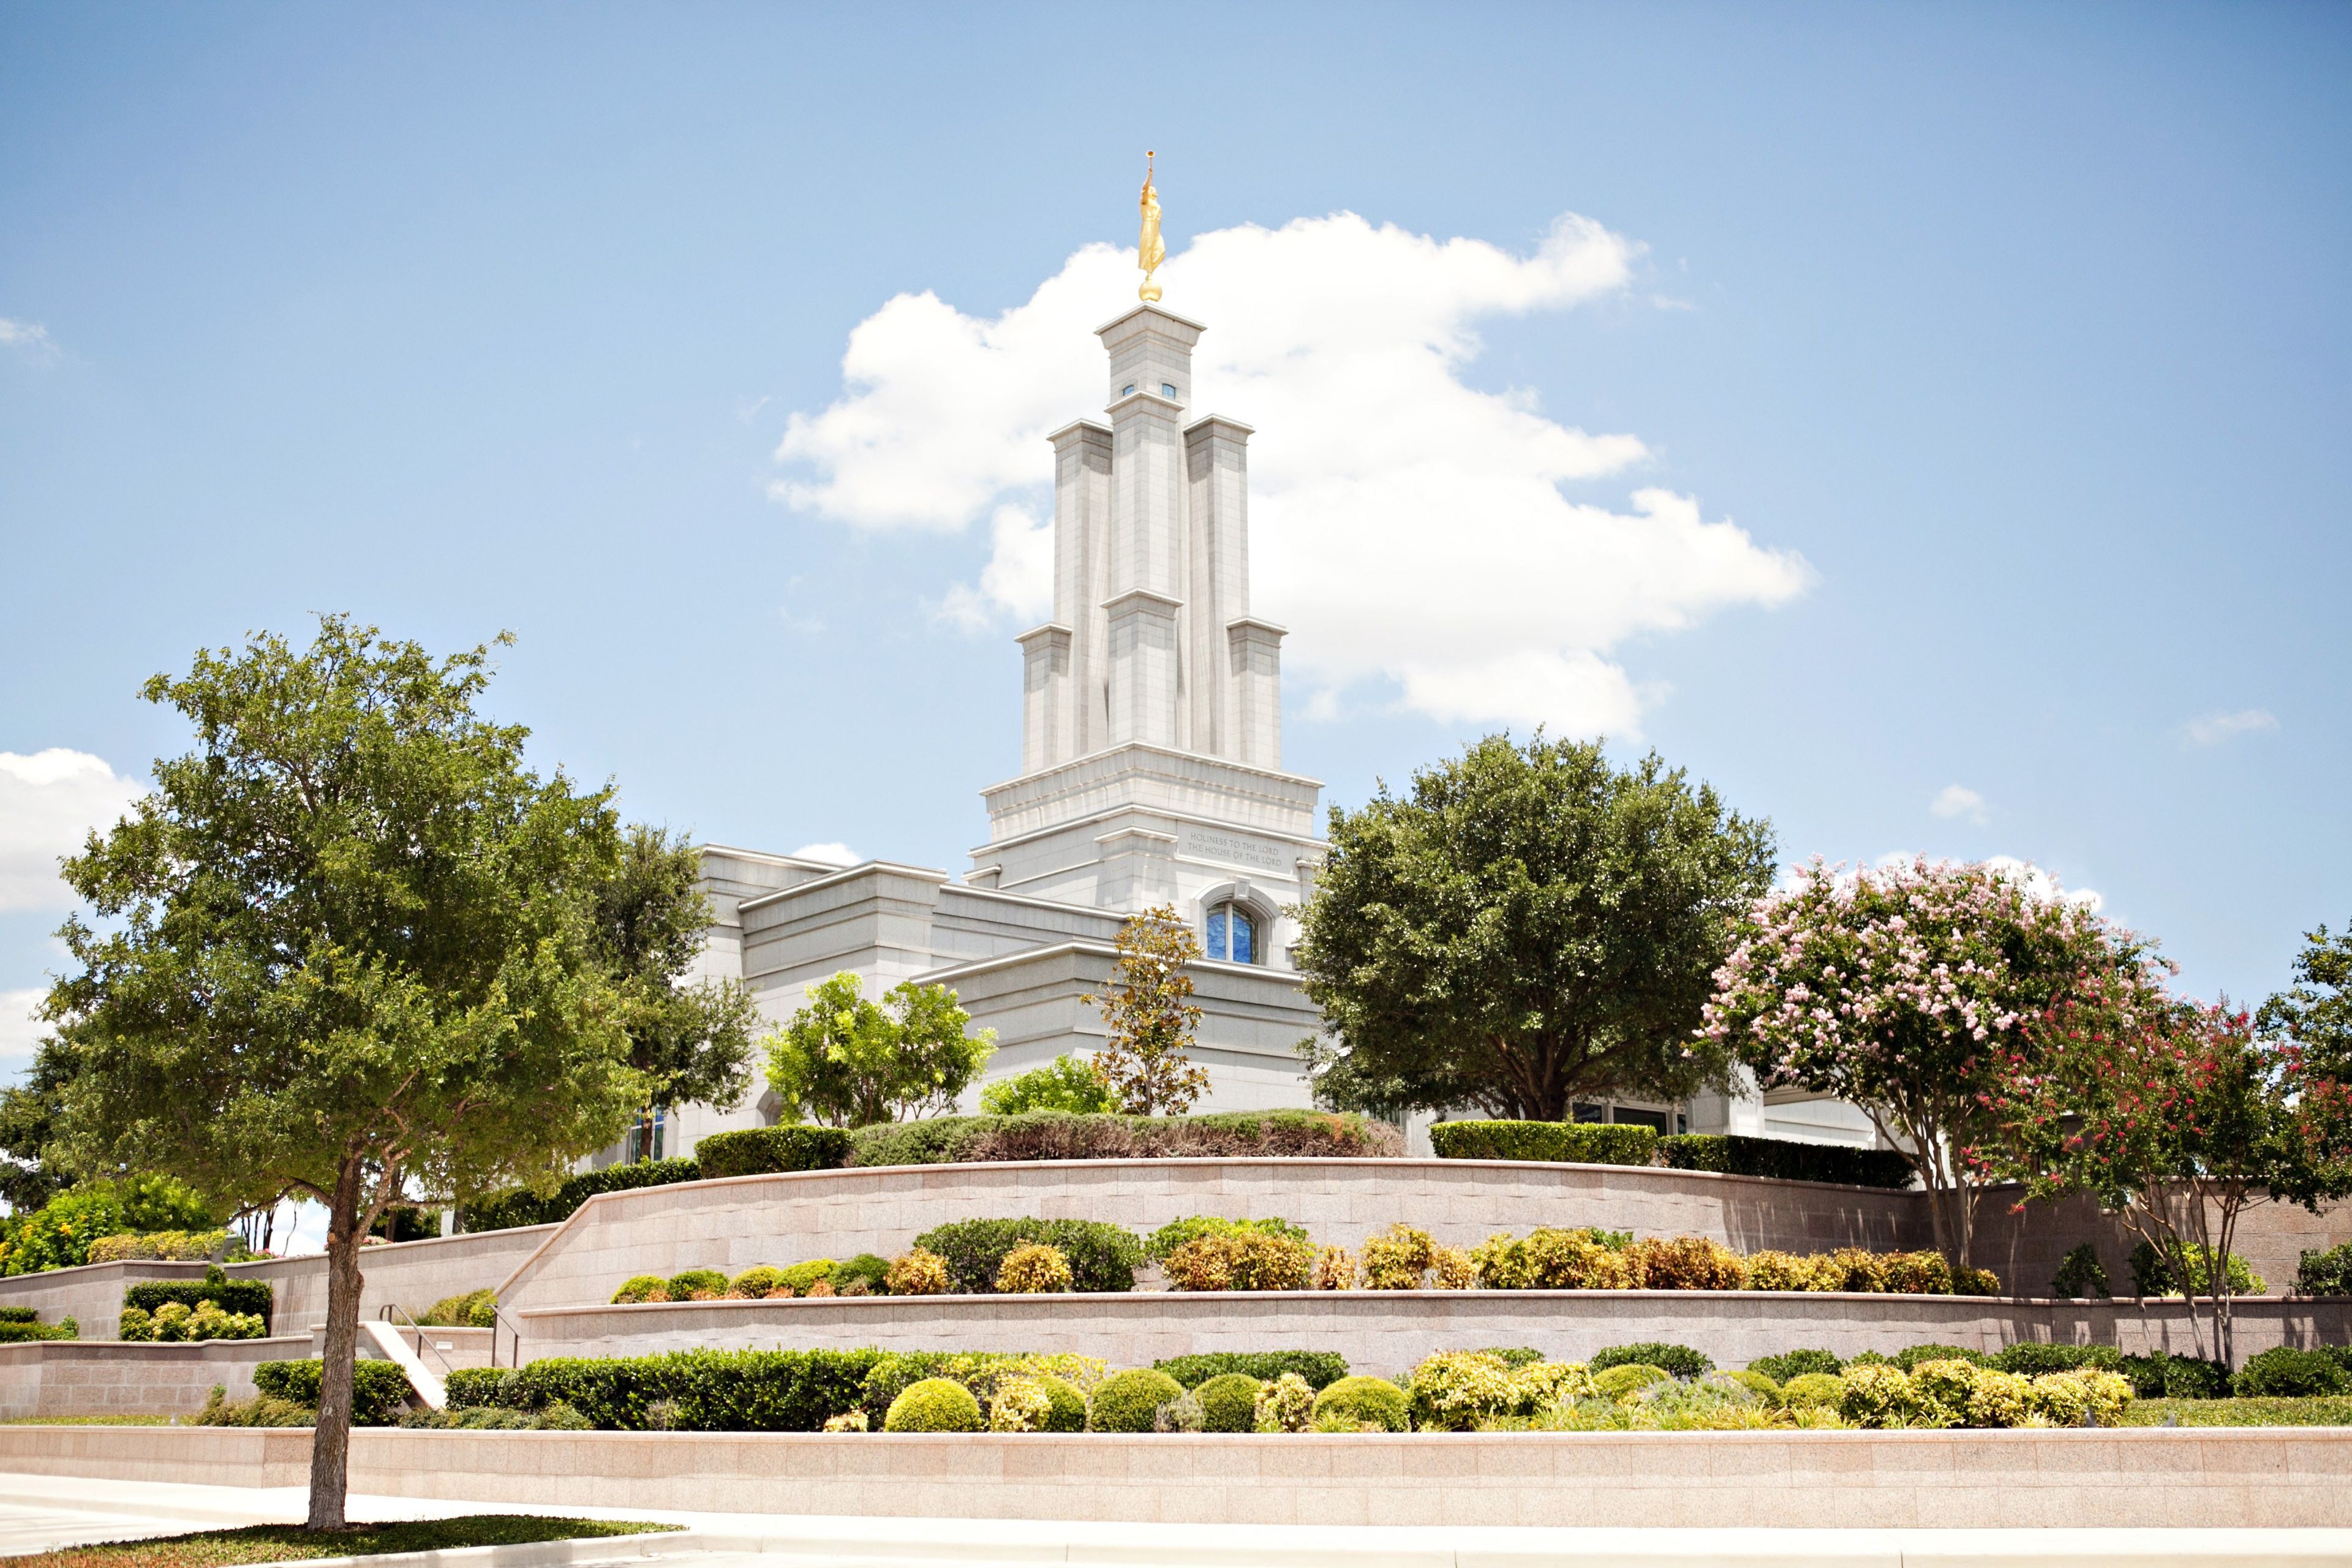 The San Antonio Texas Temple side view, including scenery.